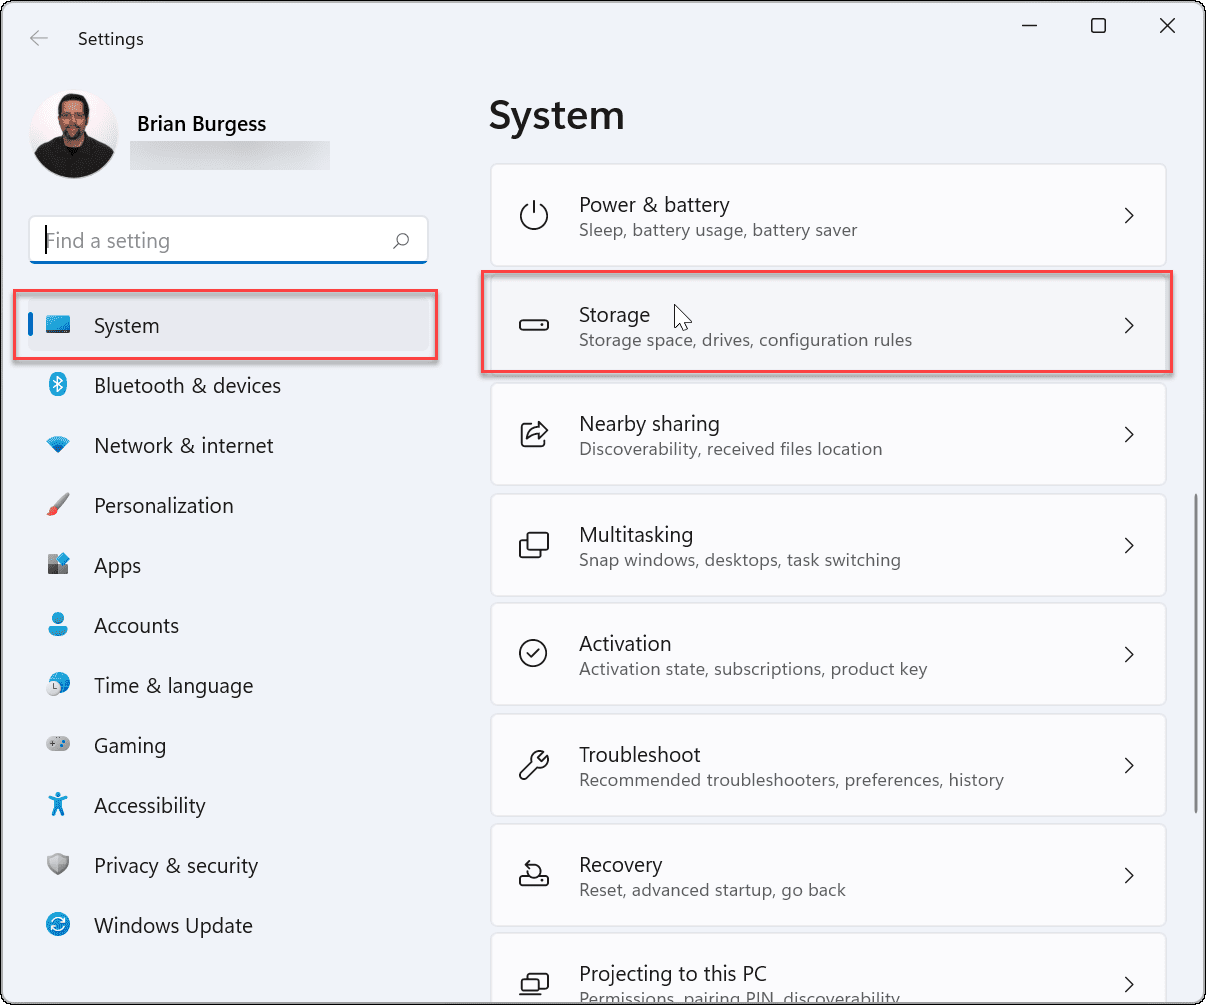 How to Change the Default Download Location in Windows 11